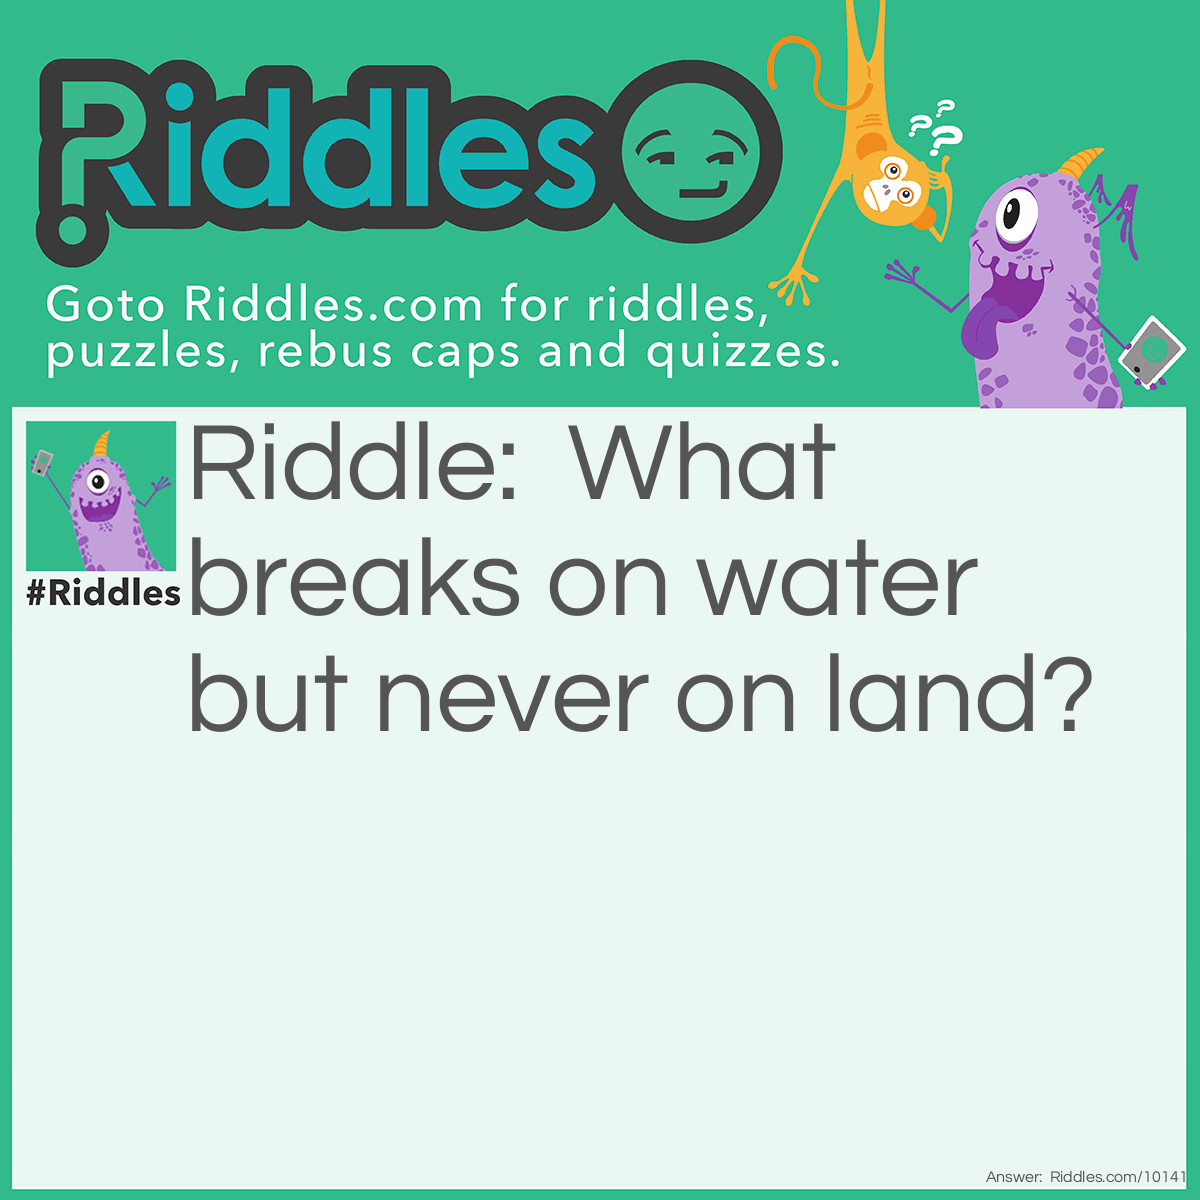 Riddle: What breaks on water but never on land? Answer: "Wave."